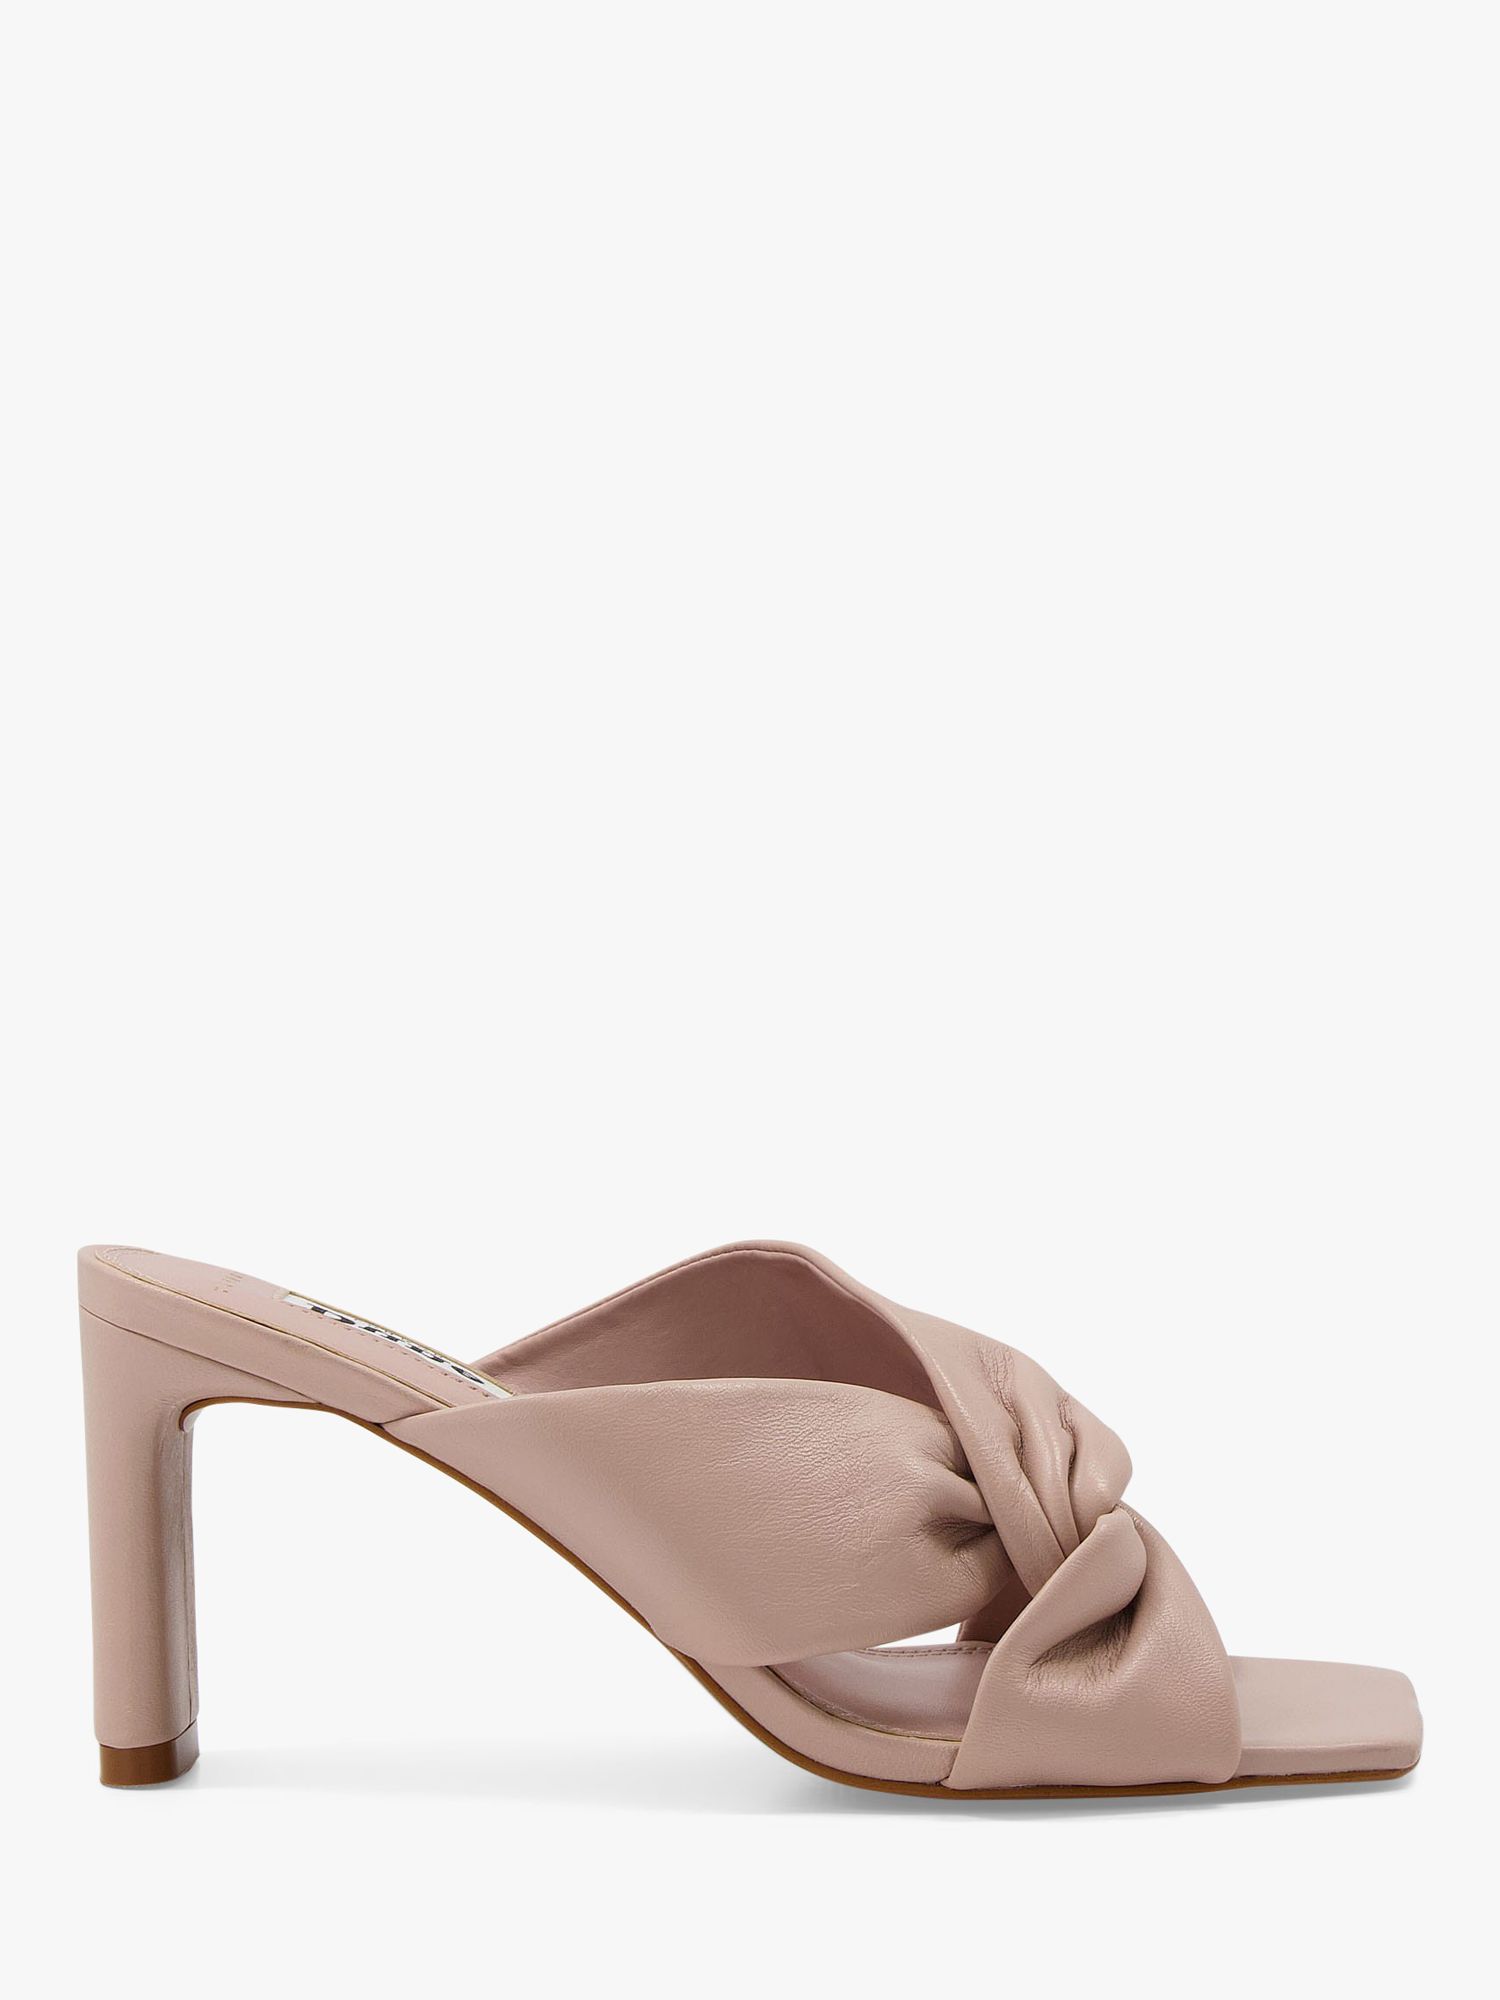 Dune Wide Fit Magnet Leather Mules, Blush at John Lewis & Partners